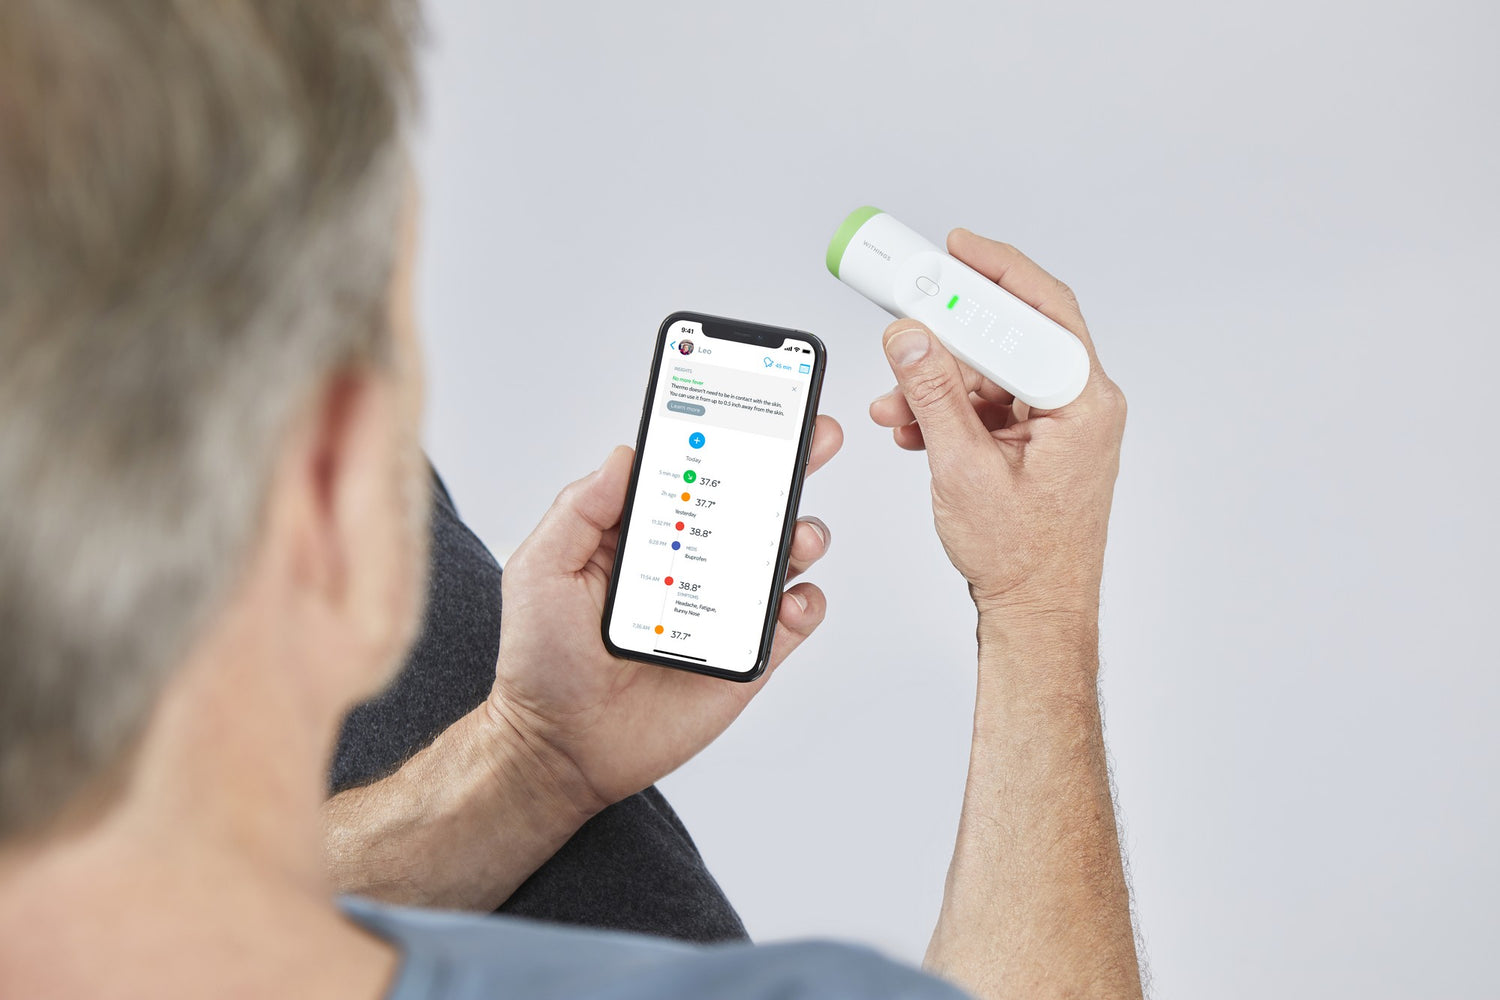 WITHINGS SMART THERMOMETER